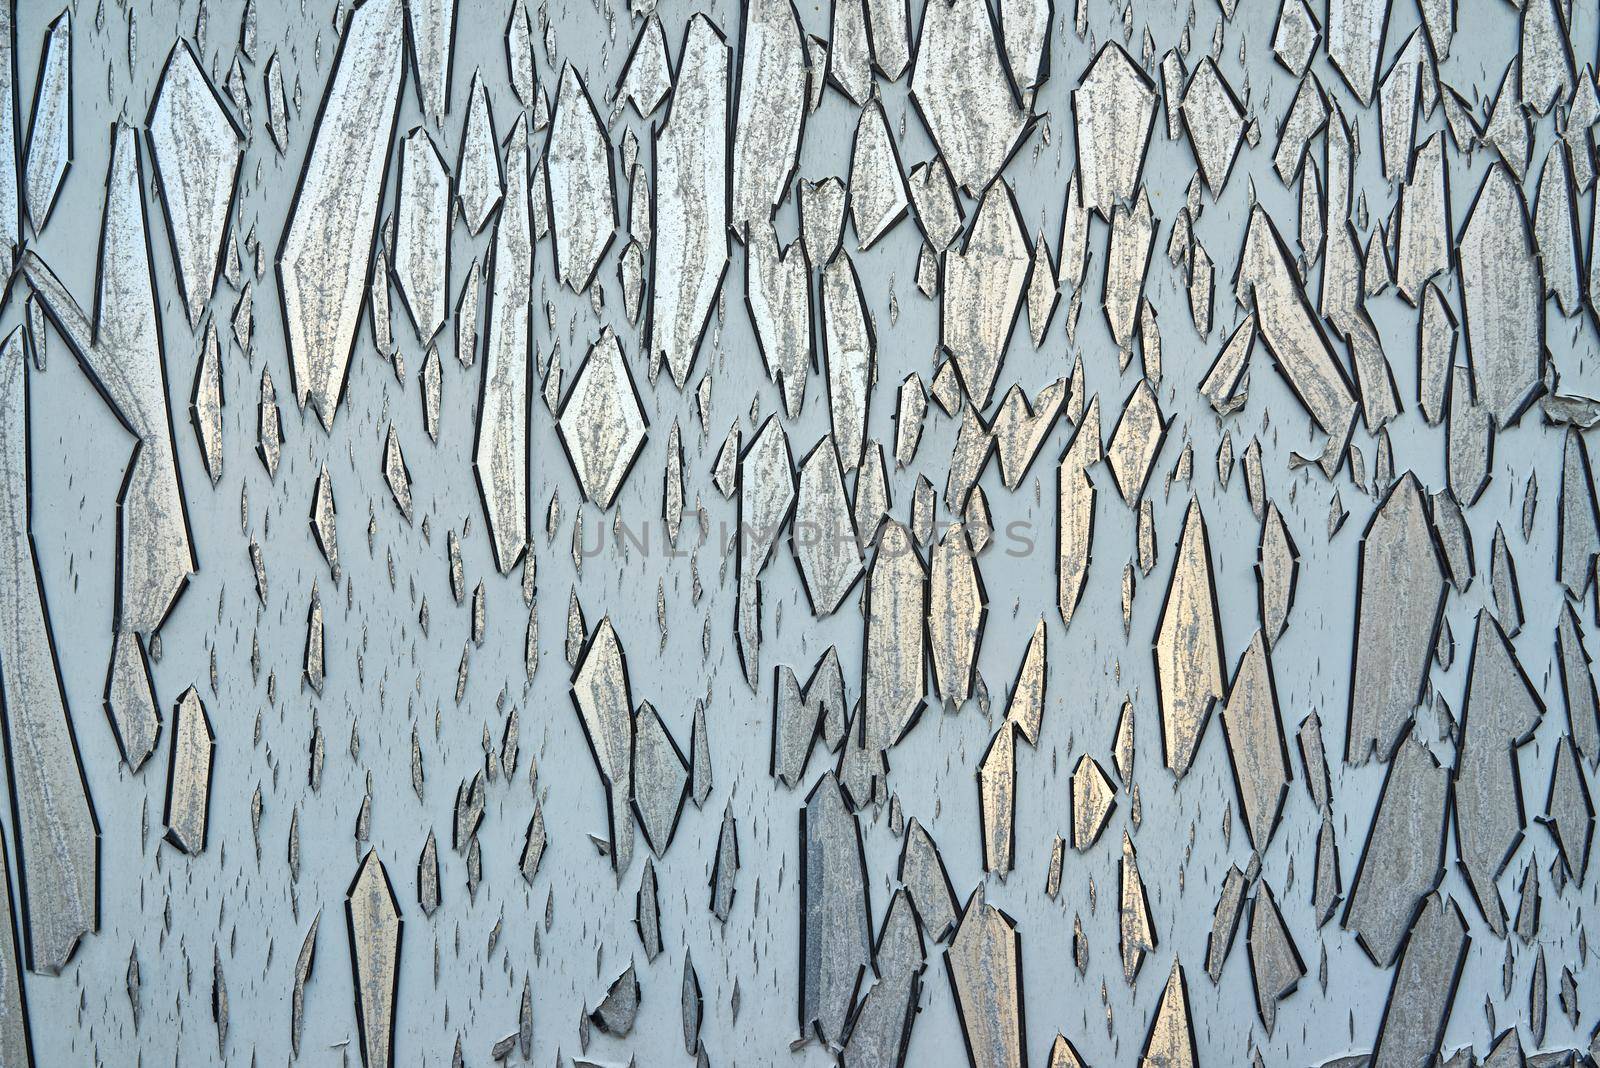 Grey paint cracks and peels off of a reflective metallic surface